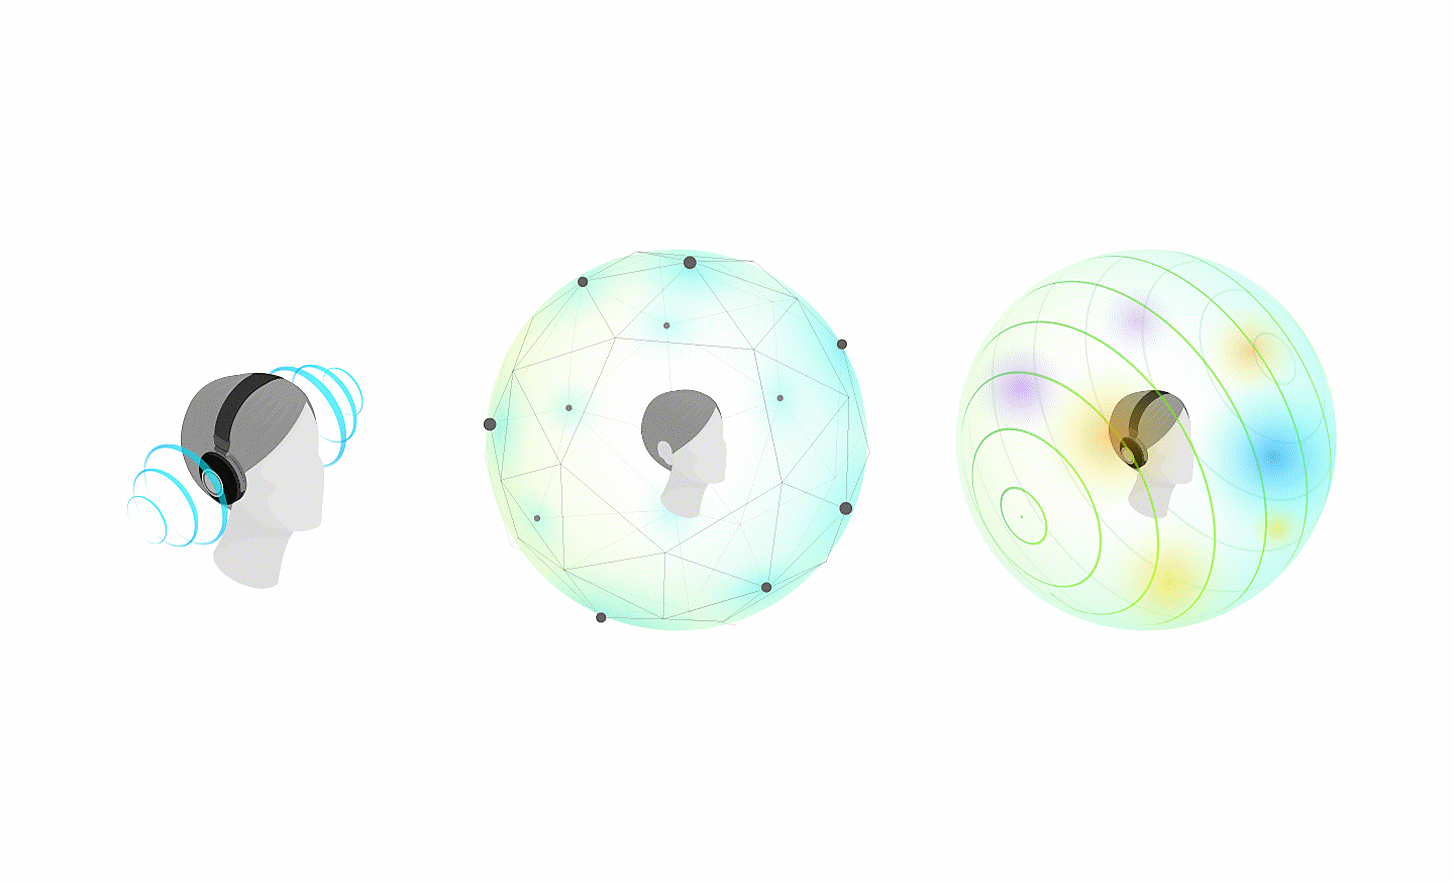 Image of 3 heads surround by lines, nets and globes representing sound